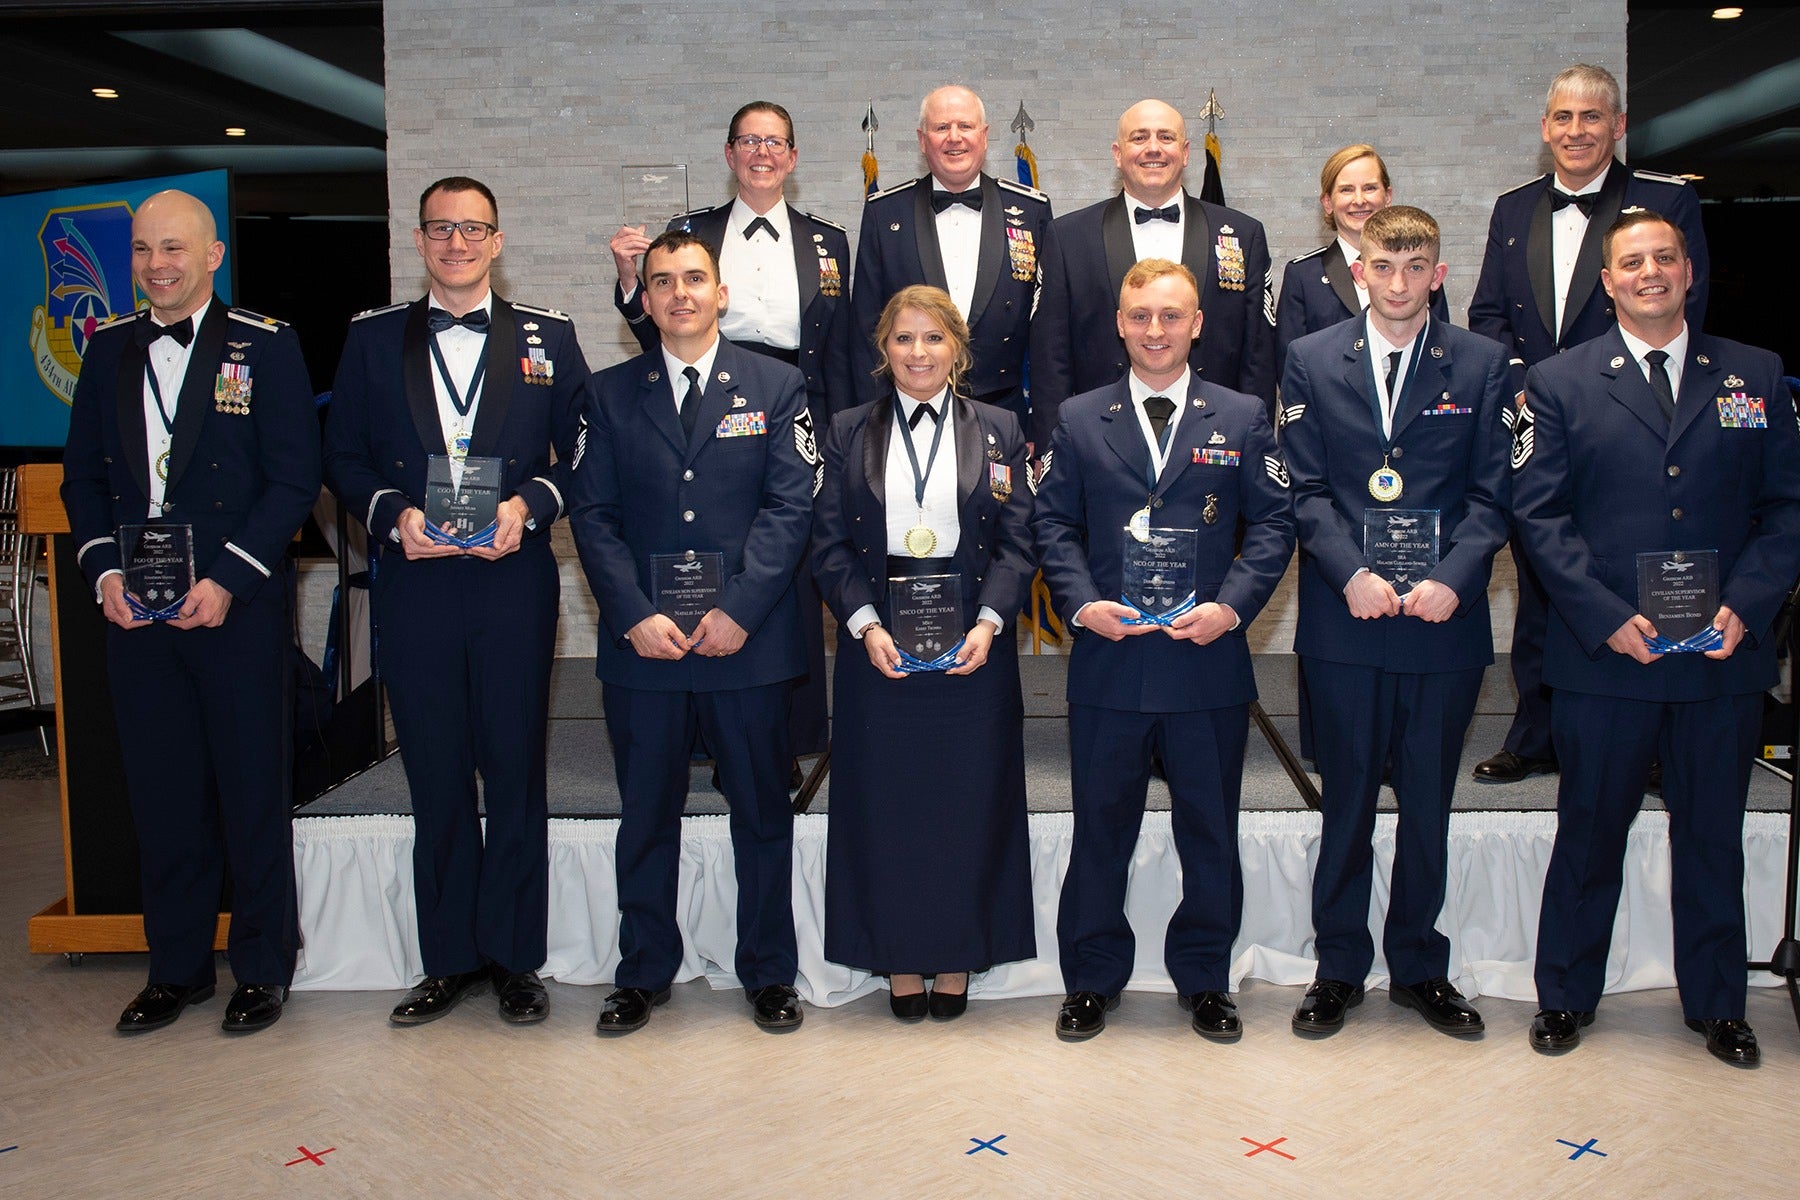 Congrats 434th Air Refueling Wing Annual Awards Winners